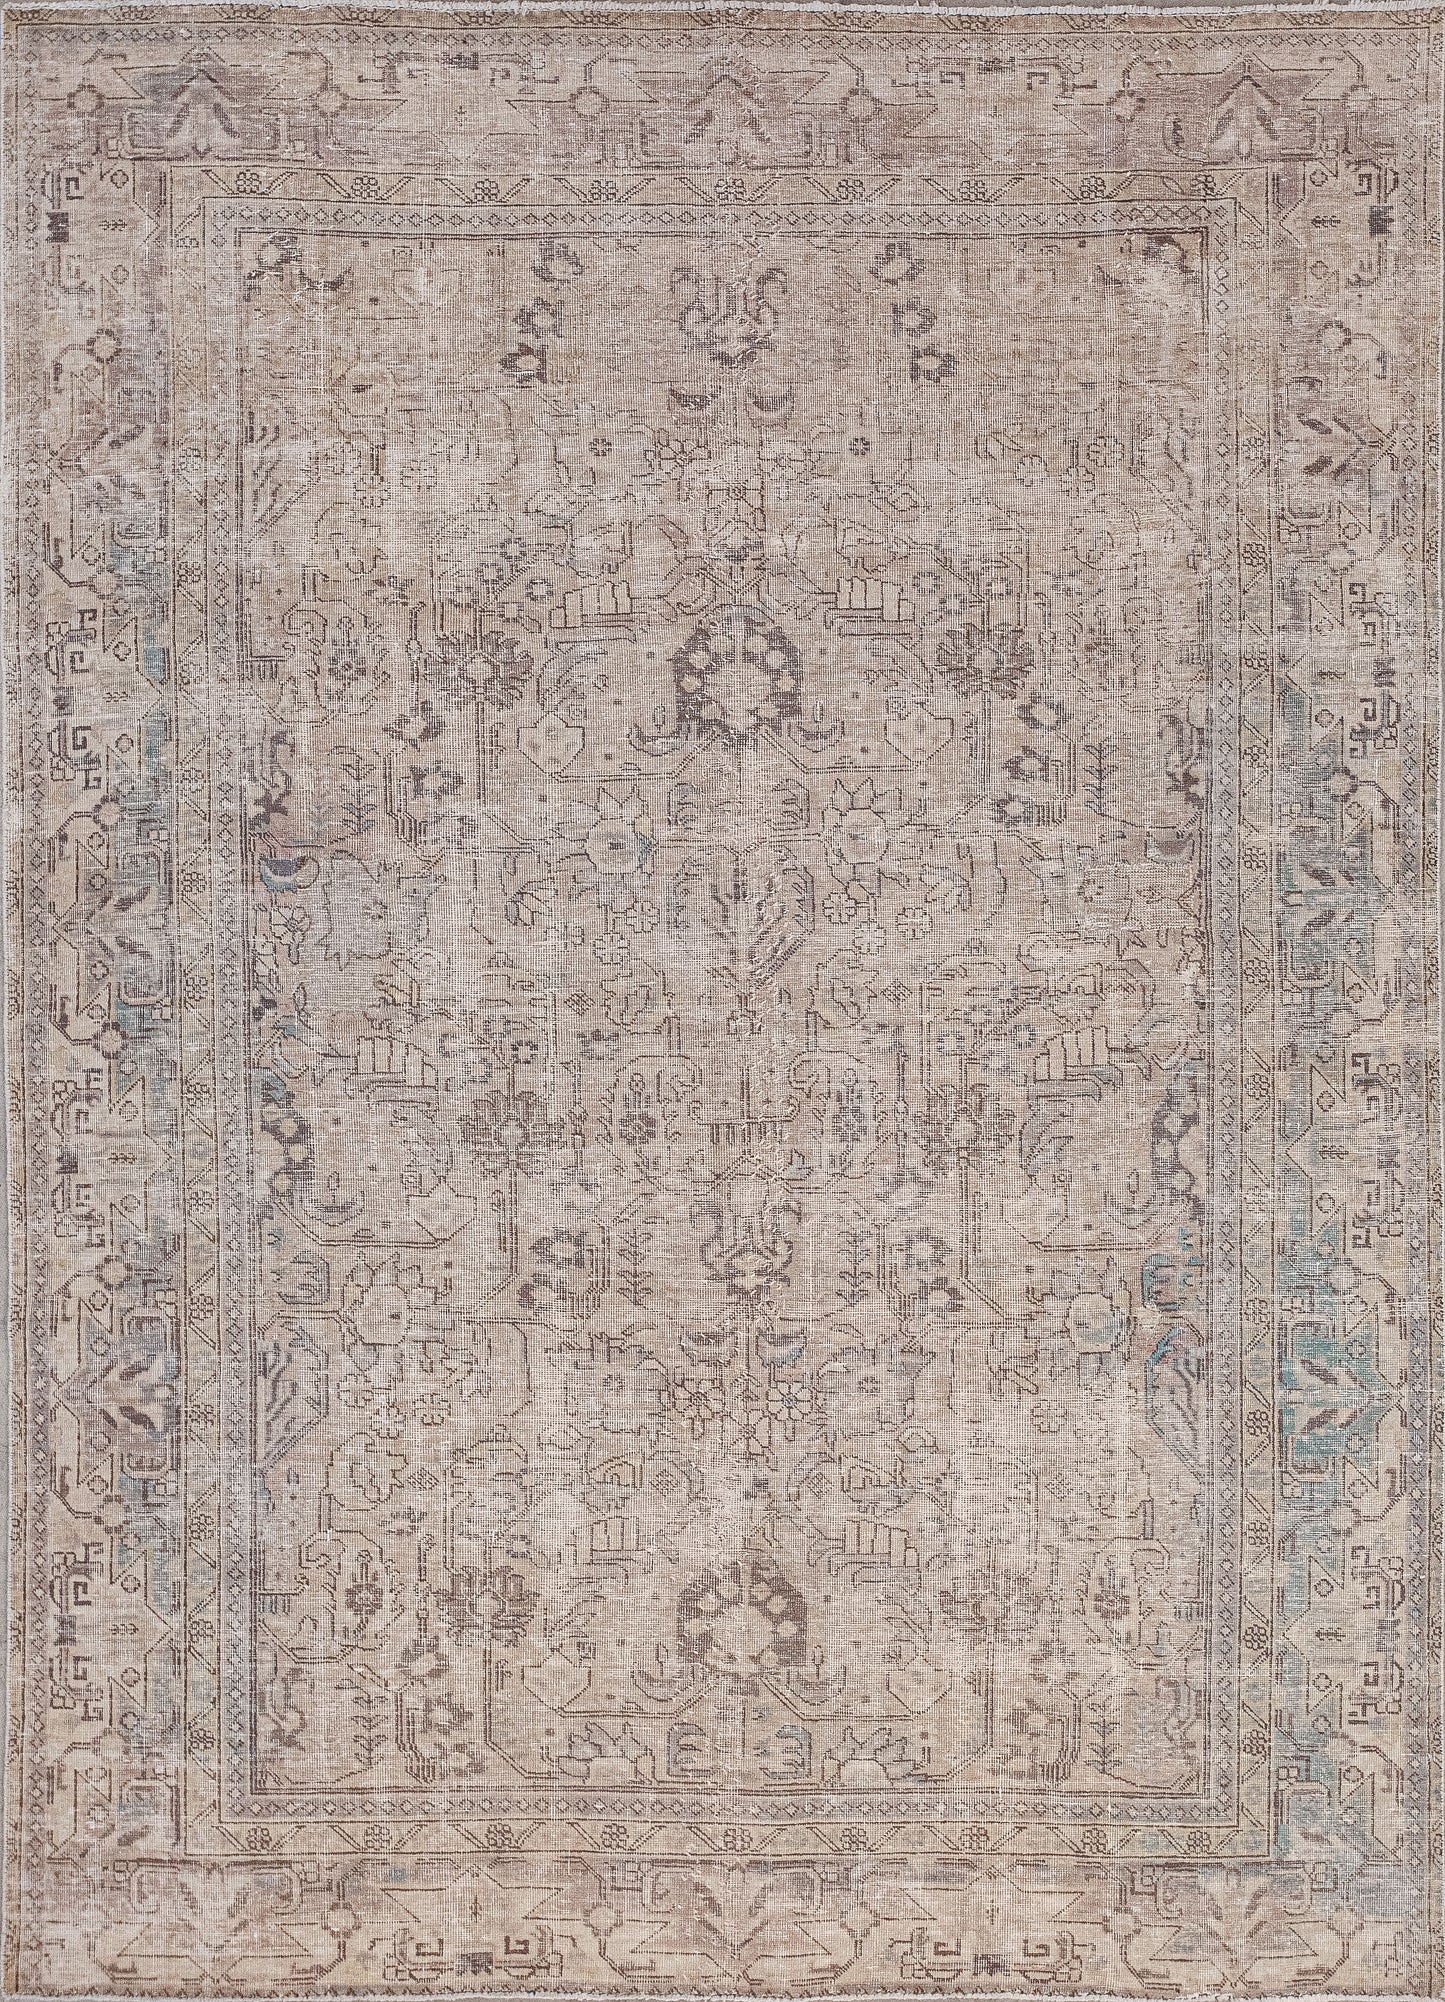 The vintage rug comes from our circa collection, famous for its worn style. The color scheme comes with a muted brown for the background, blue and beige highlights, and black outlines.